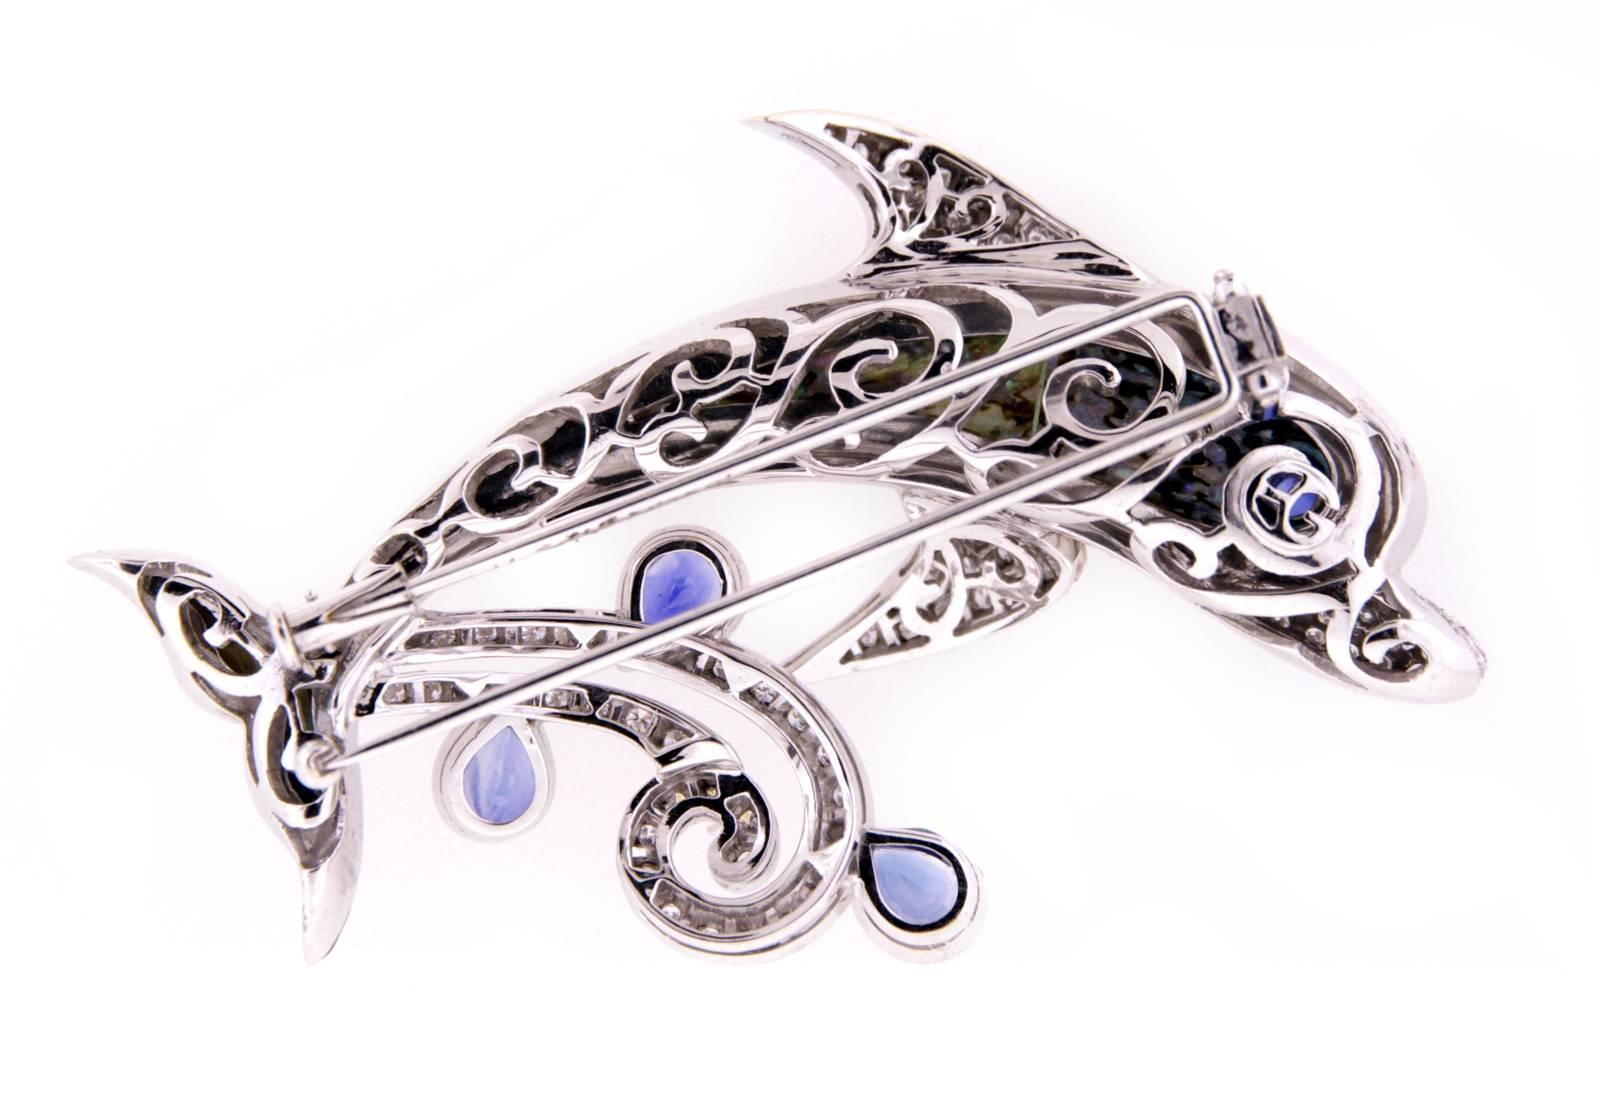 The dolphin brooch springs up from the sea and creates a diamond wave and mist with 5.56 carats of faceted blue Ceylon sapphire. The three-dimensional body is decorated with tinted New Zealand paua shell (abalone) topped by transparent crystal,